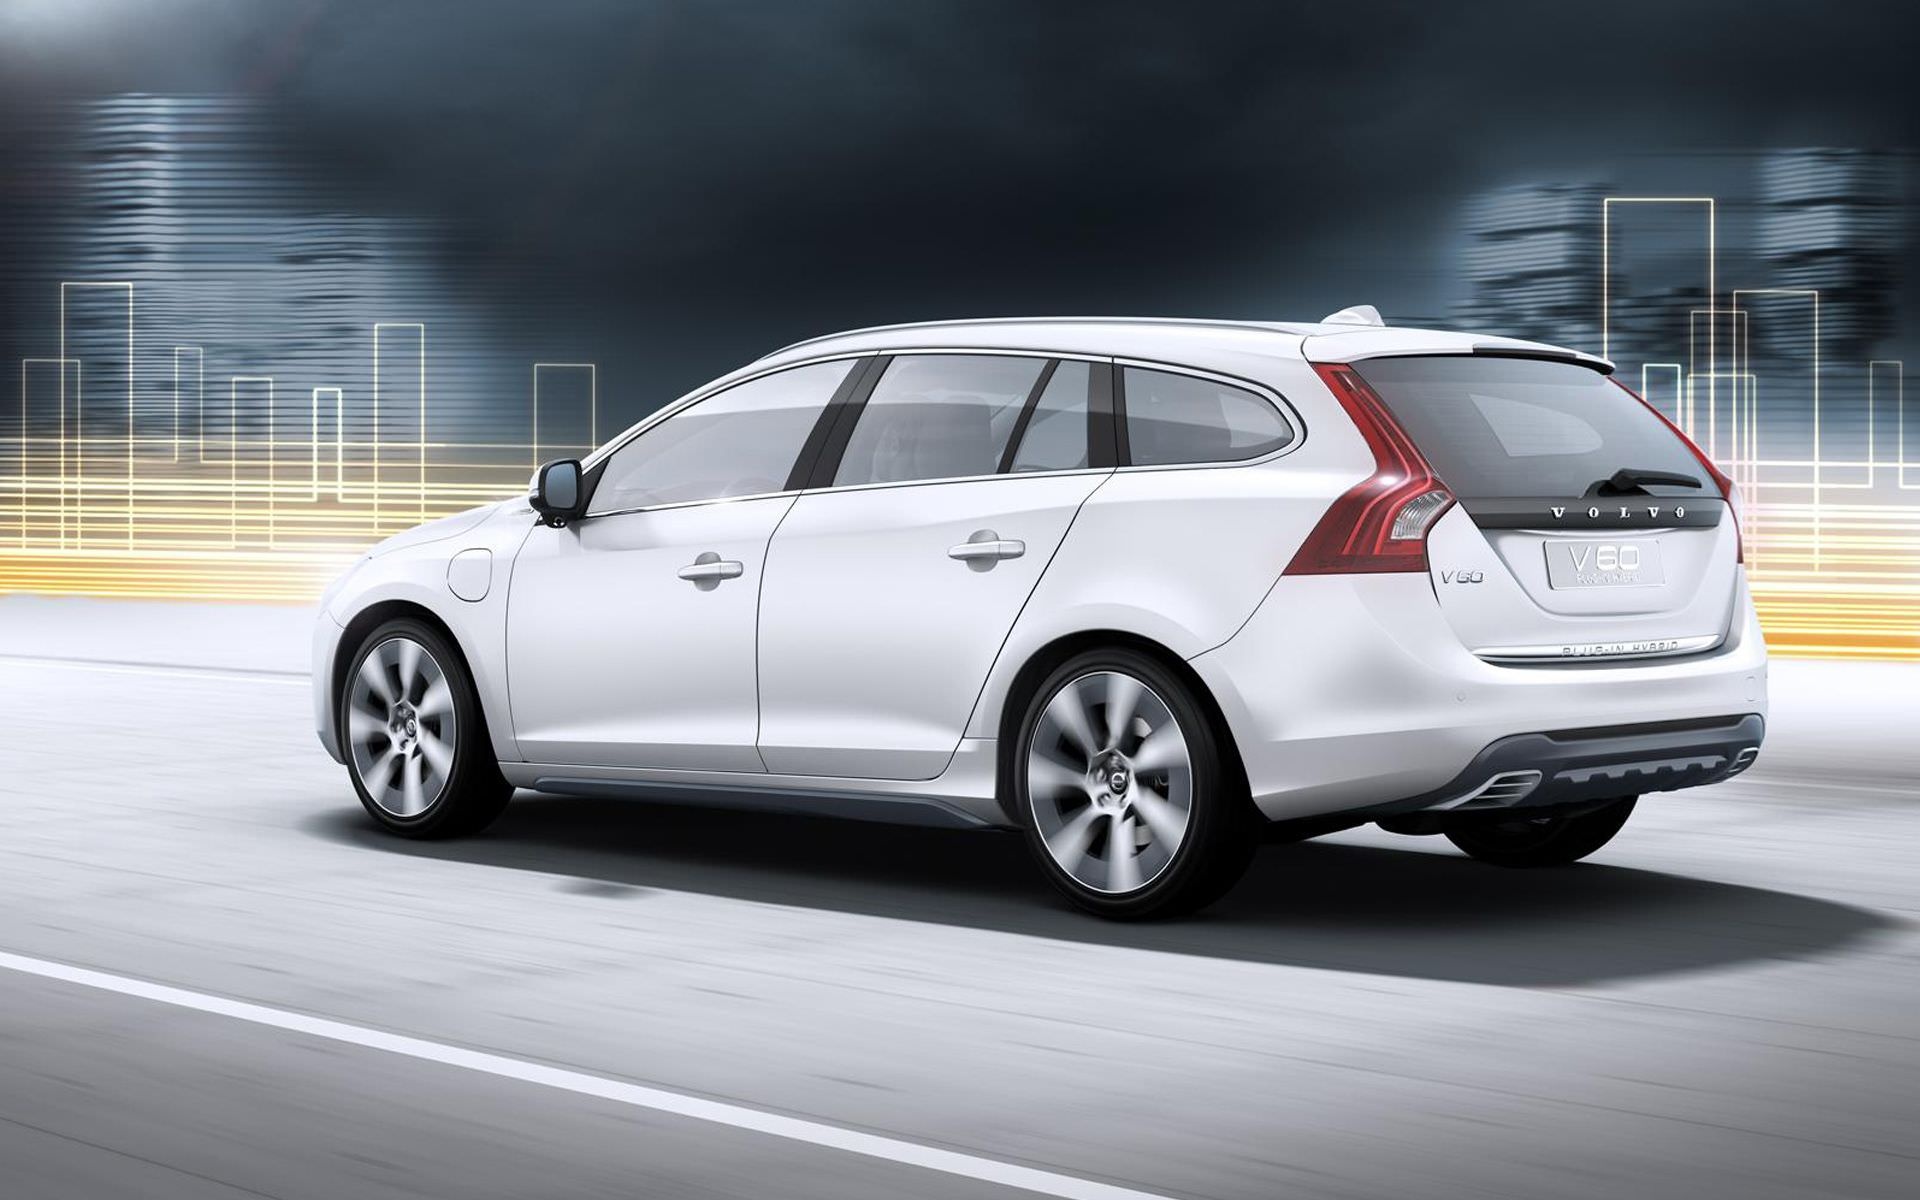 Volvo V60, iPhone 8 wallpapers, High-quality pictures, Android and desktop, 1920x1200 HD Desktop